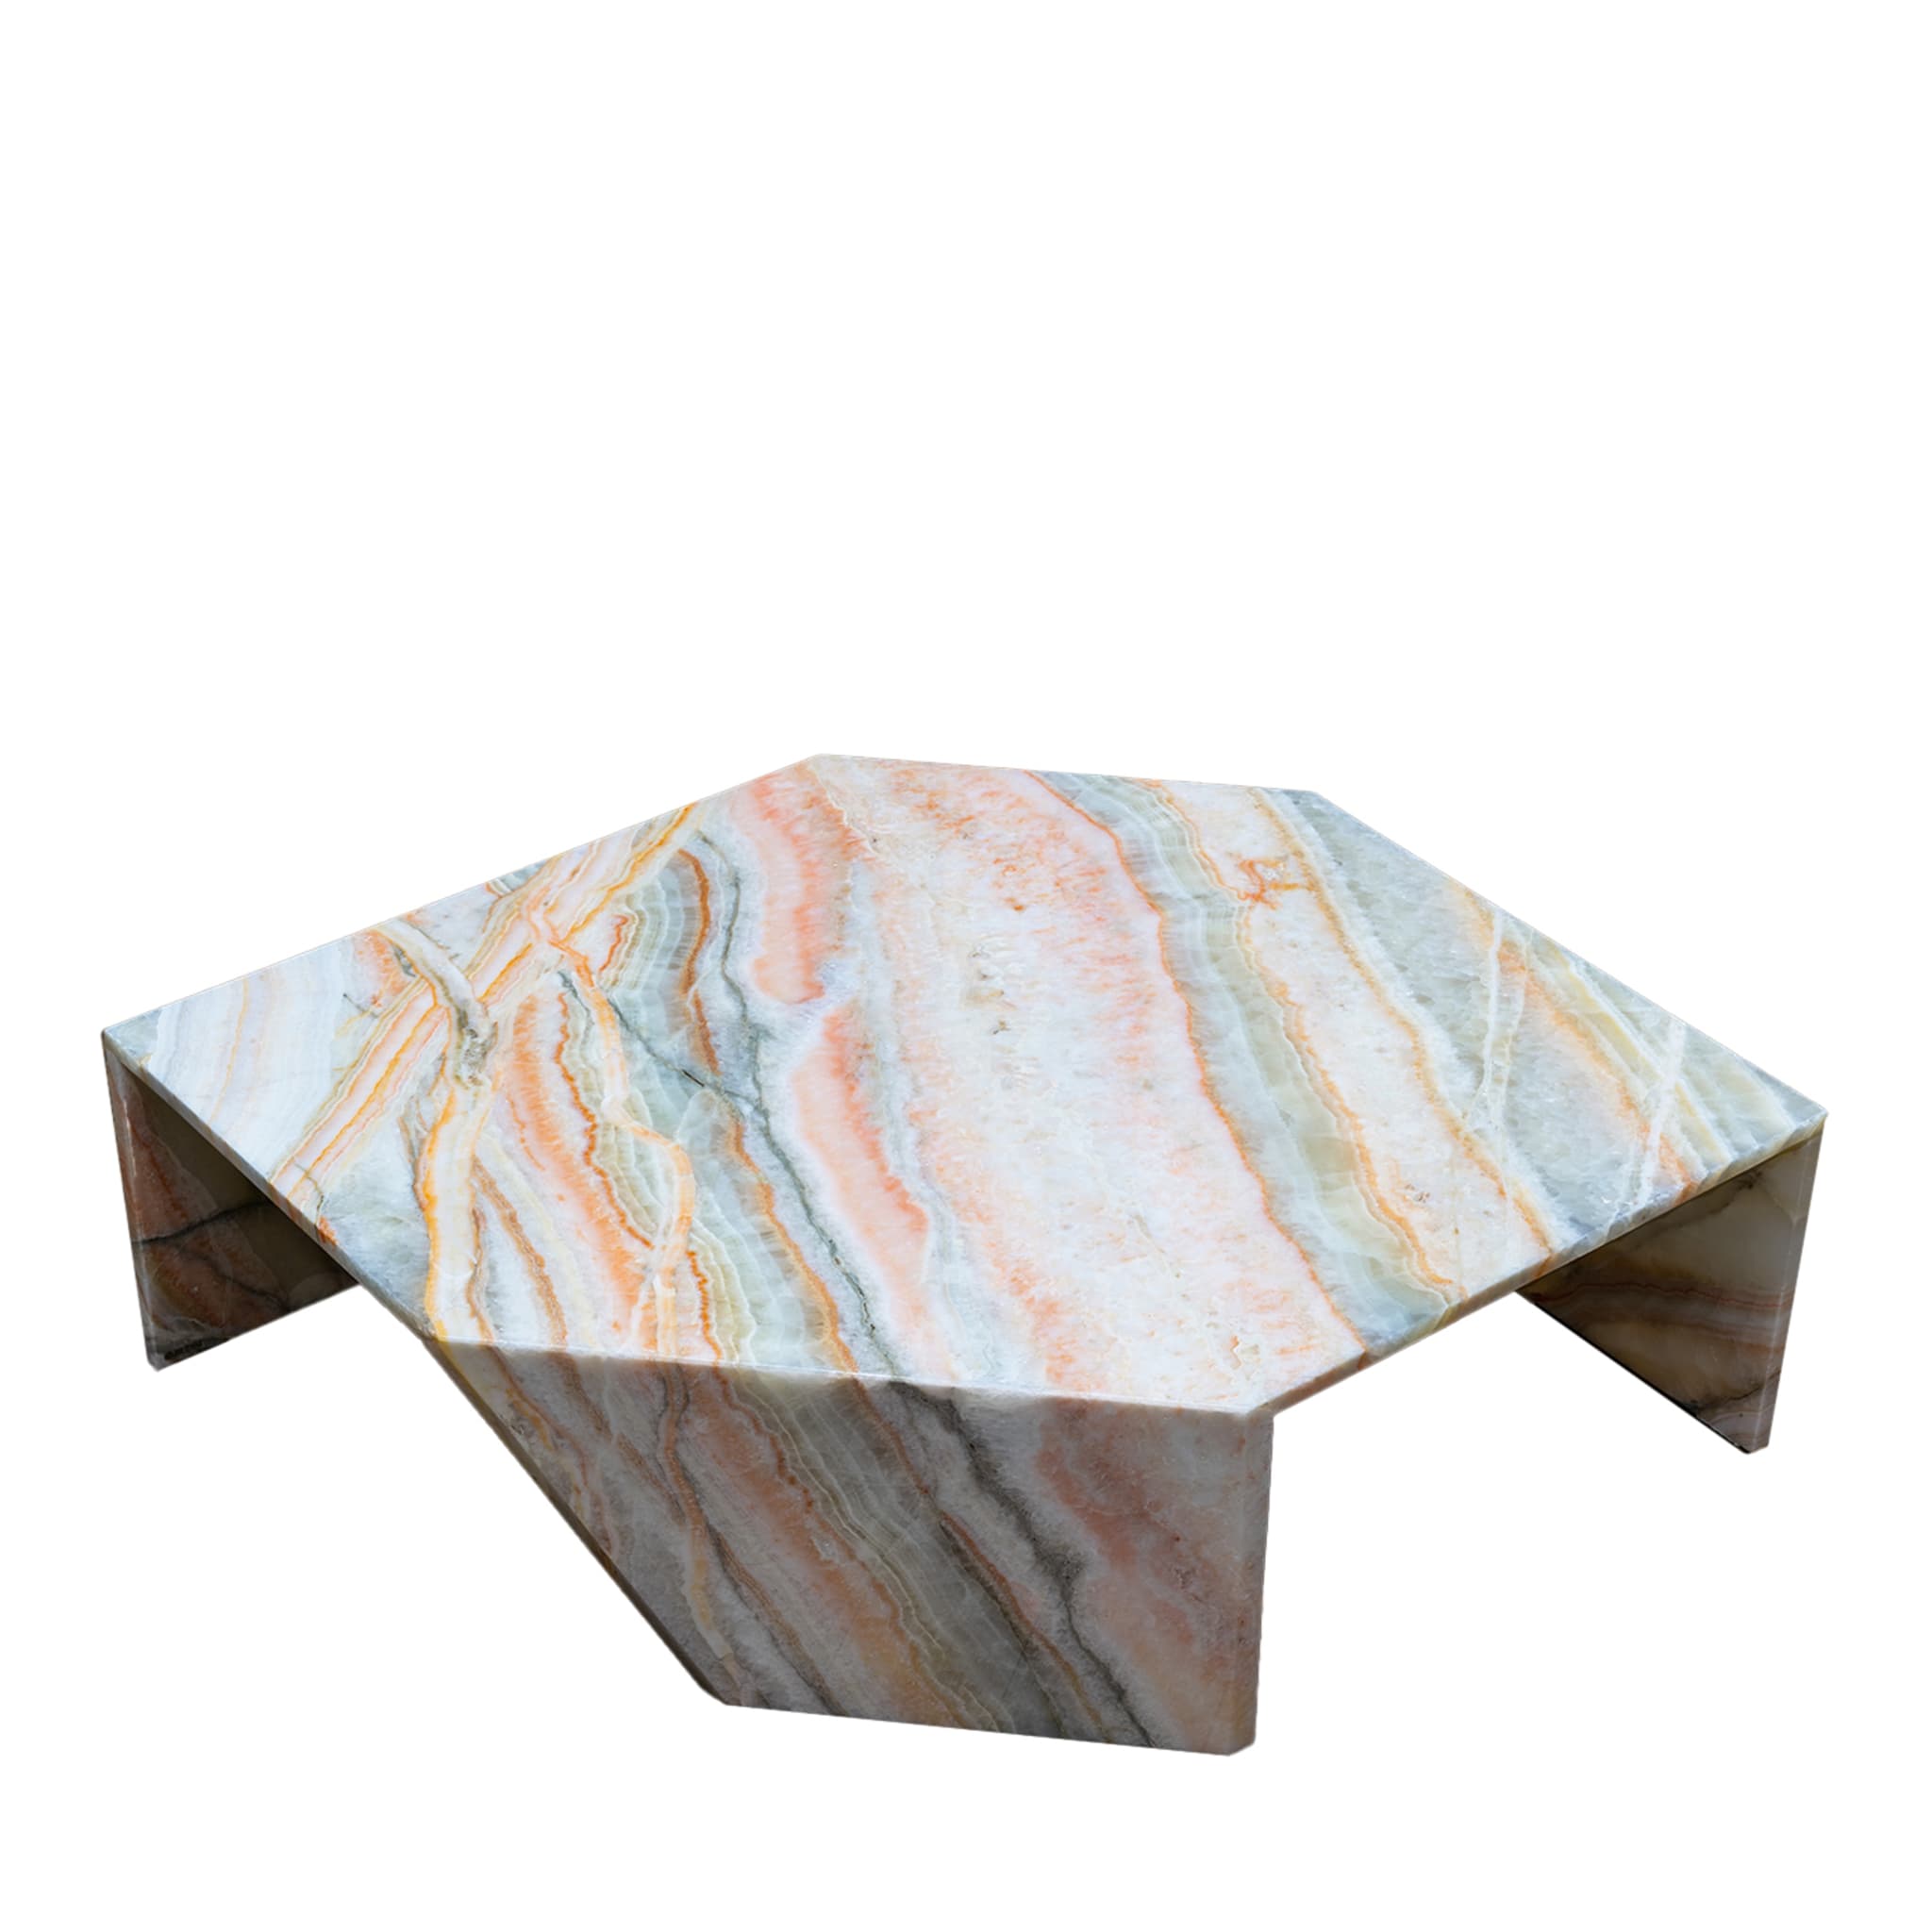 Origami Rainbow Coffee Table by Patricia Urquiola - Size S - Main view